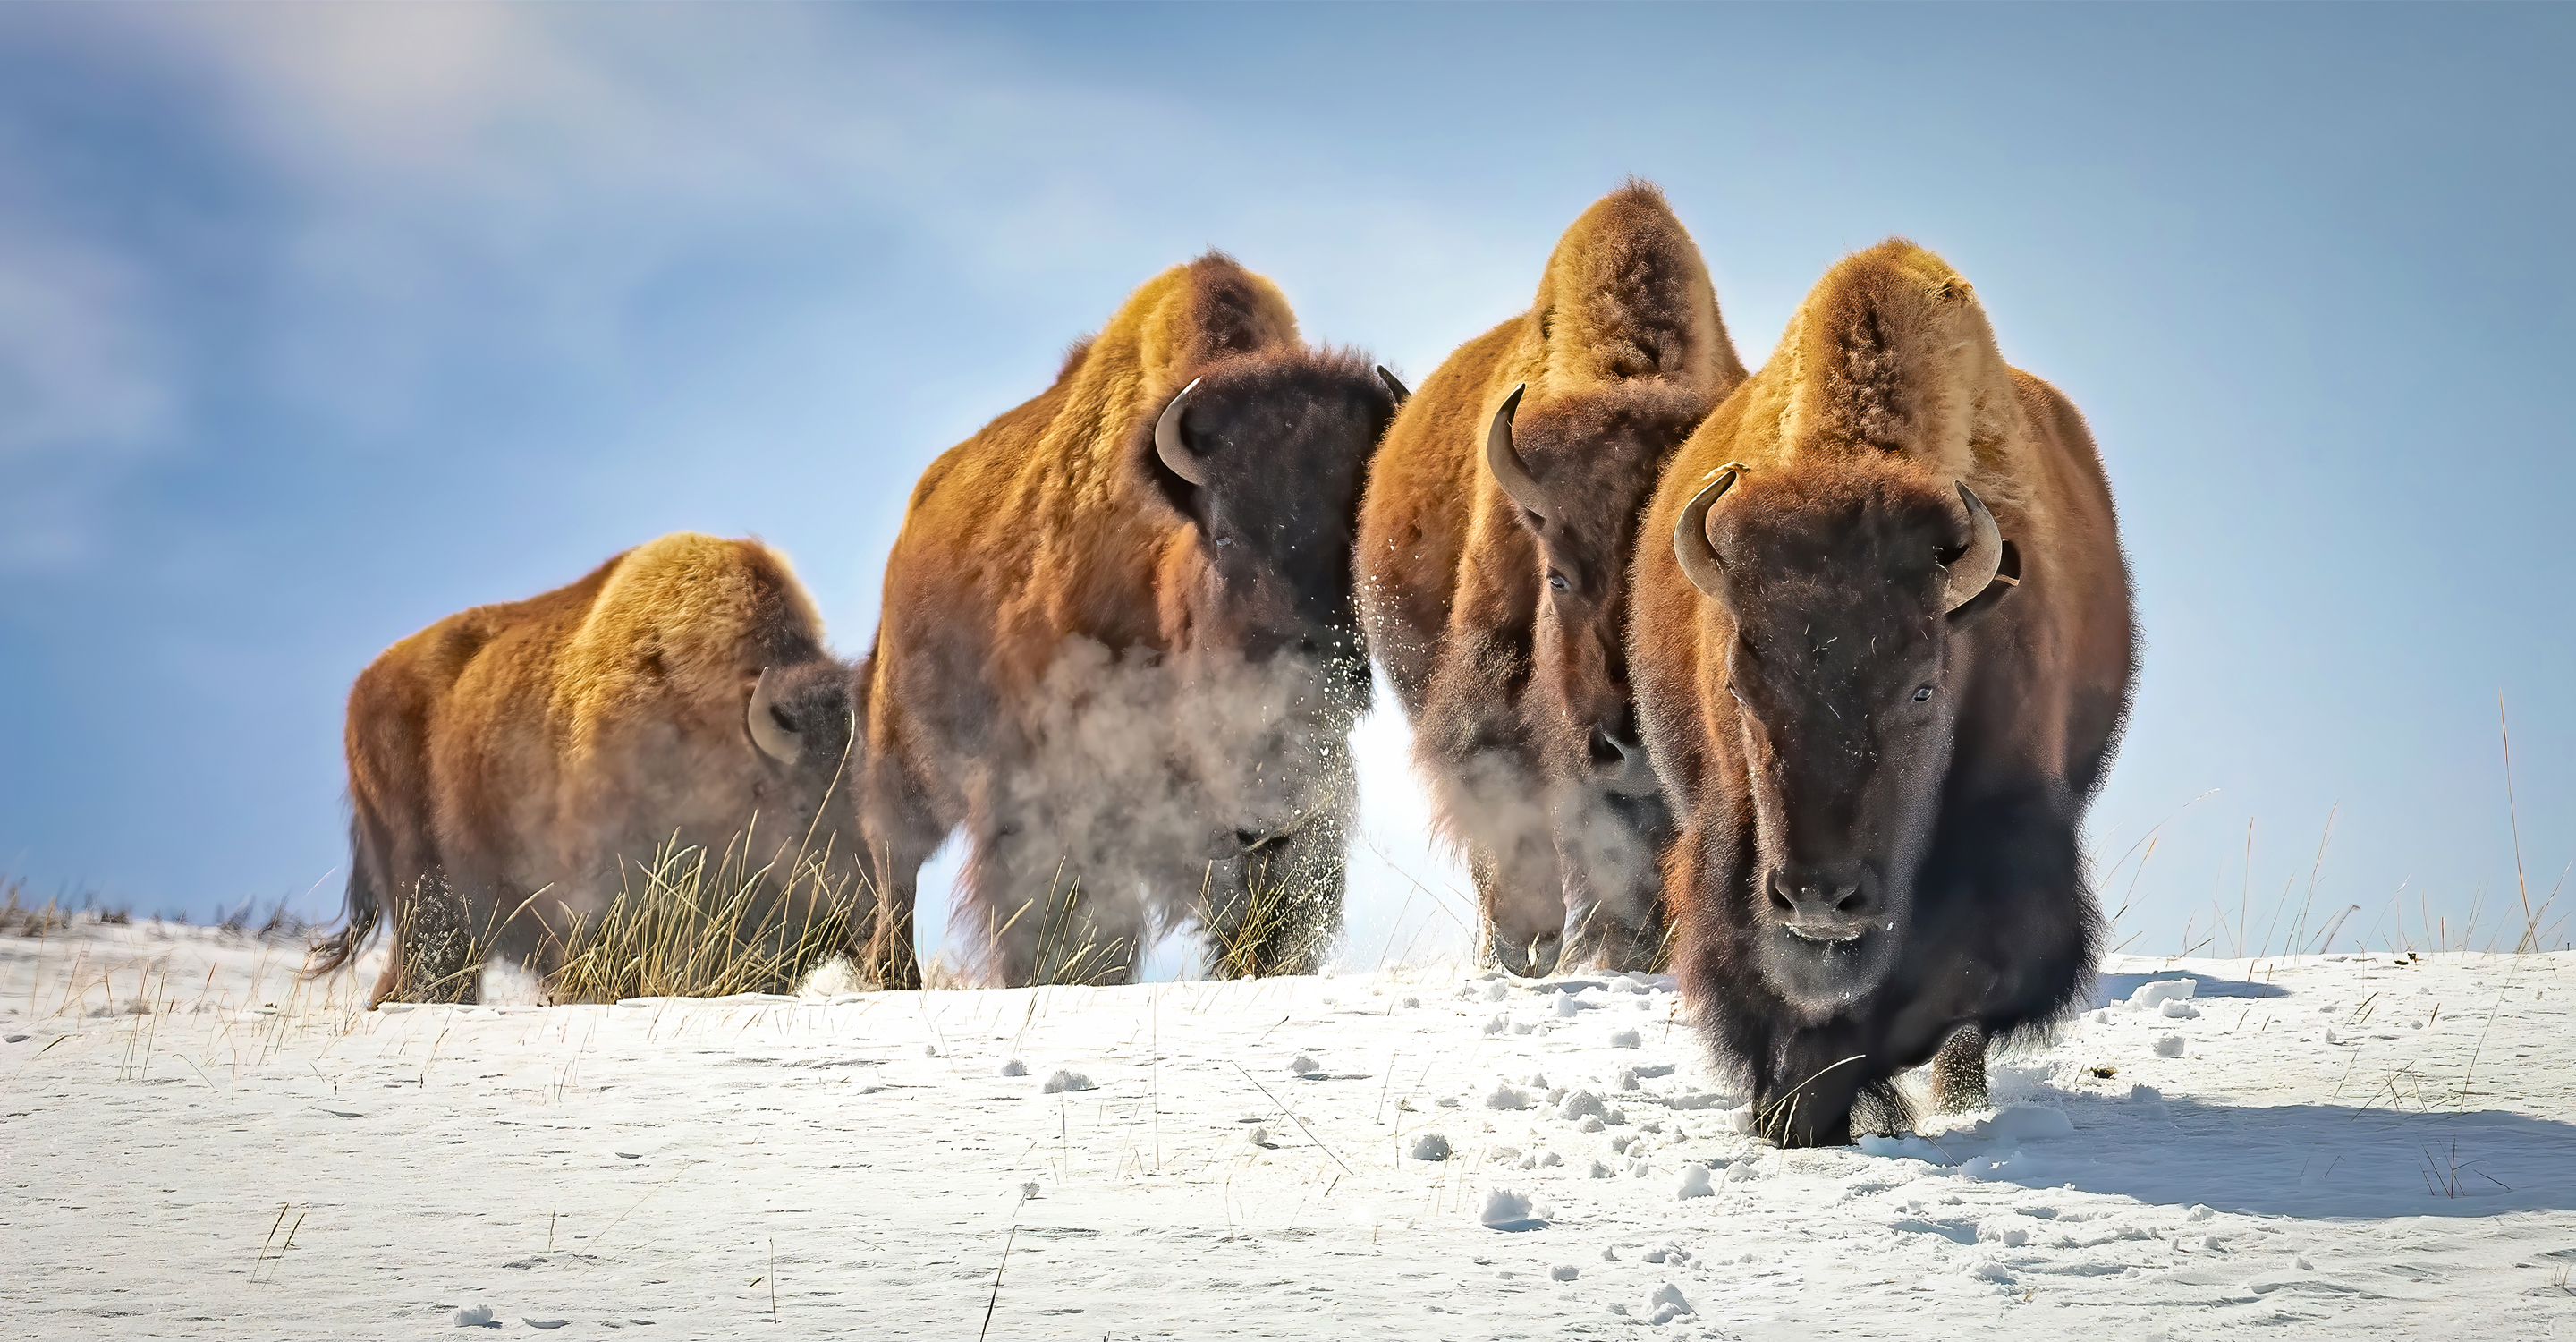 Four bison walk together in the snow in Yellowstone National Park, United States